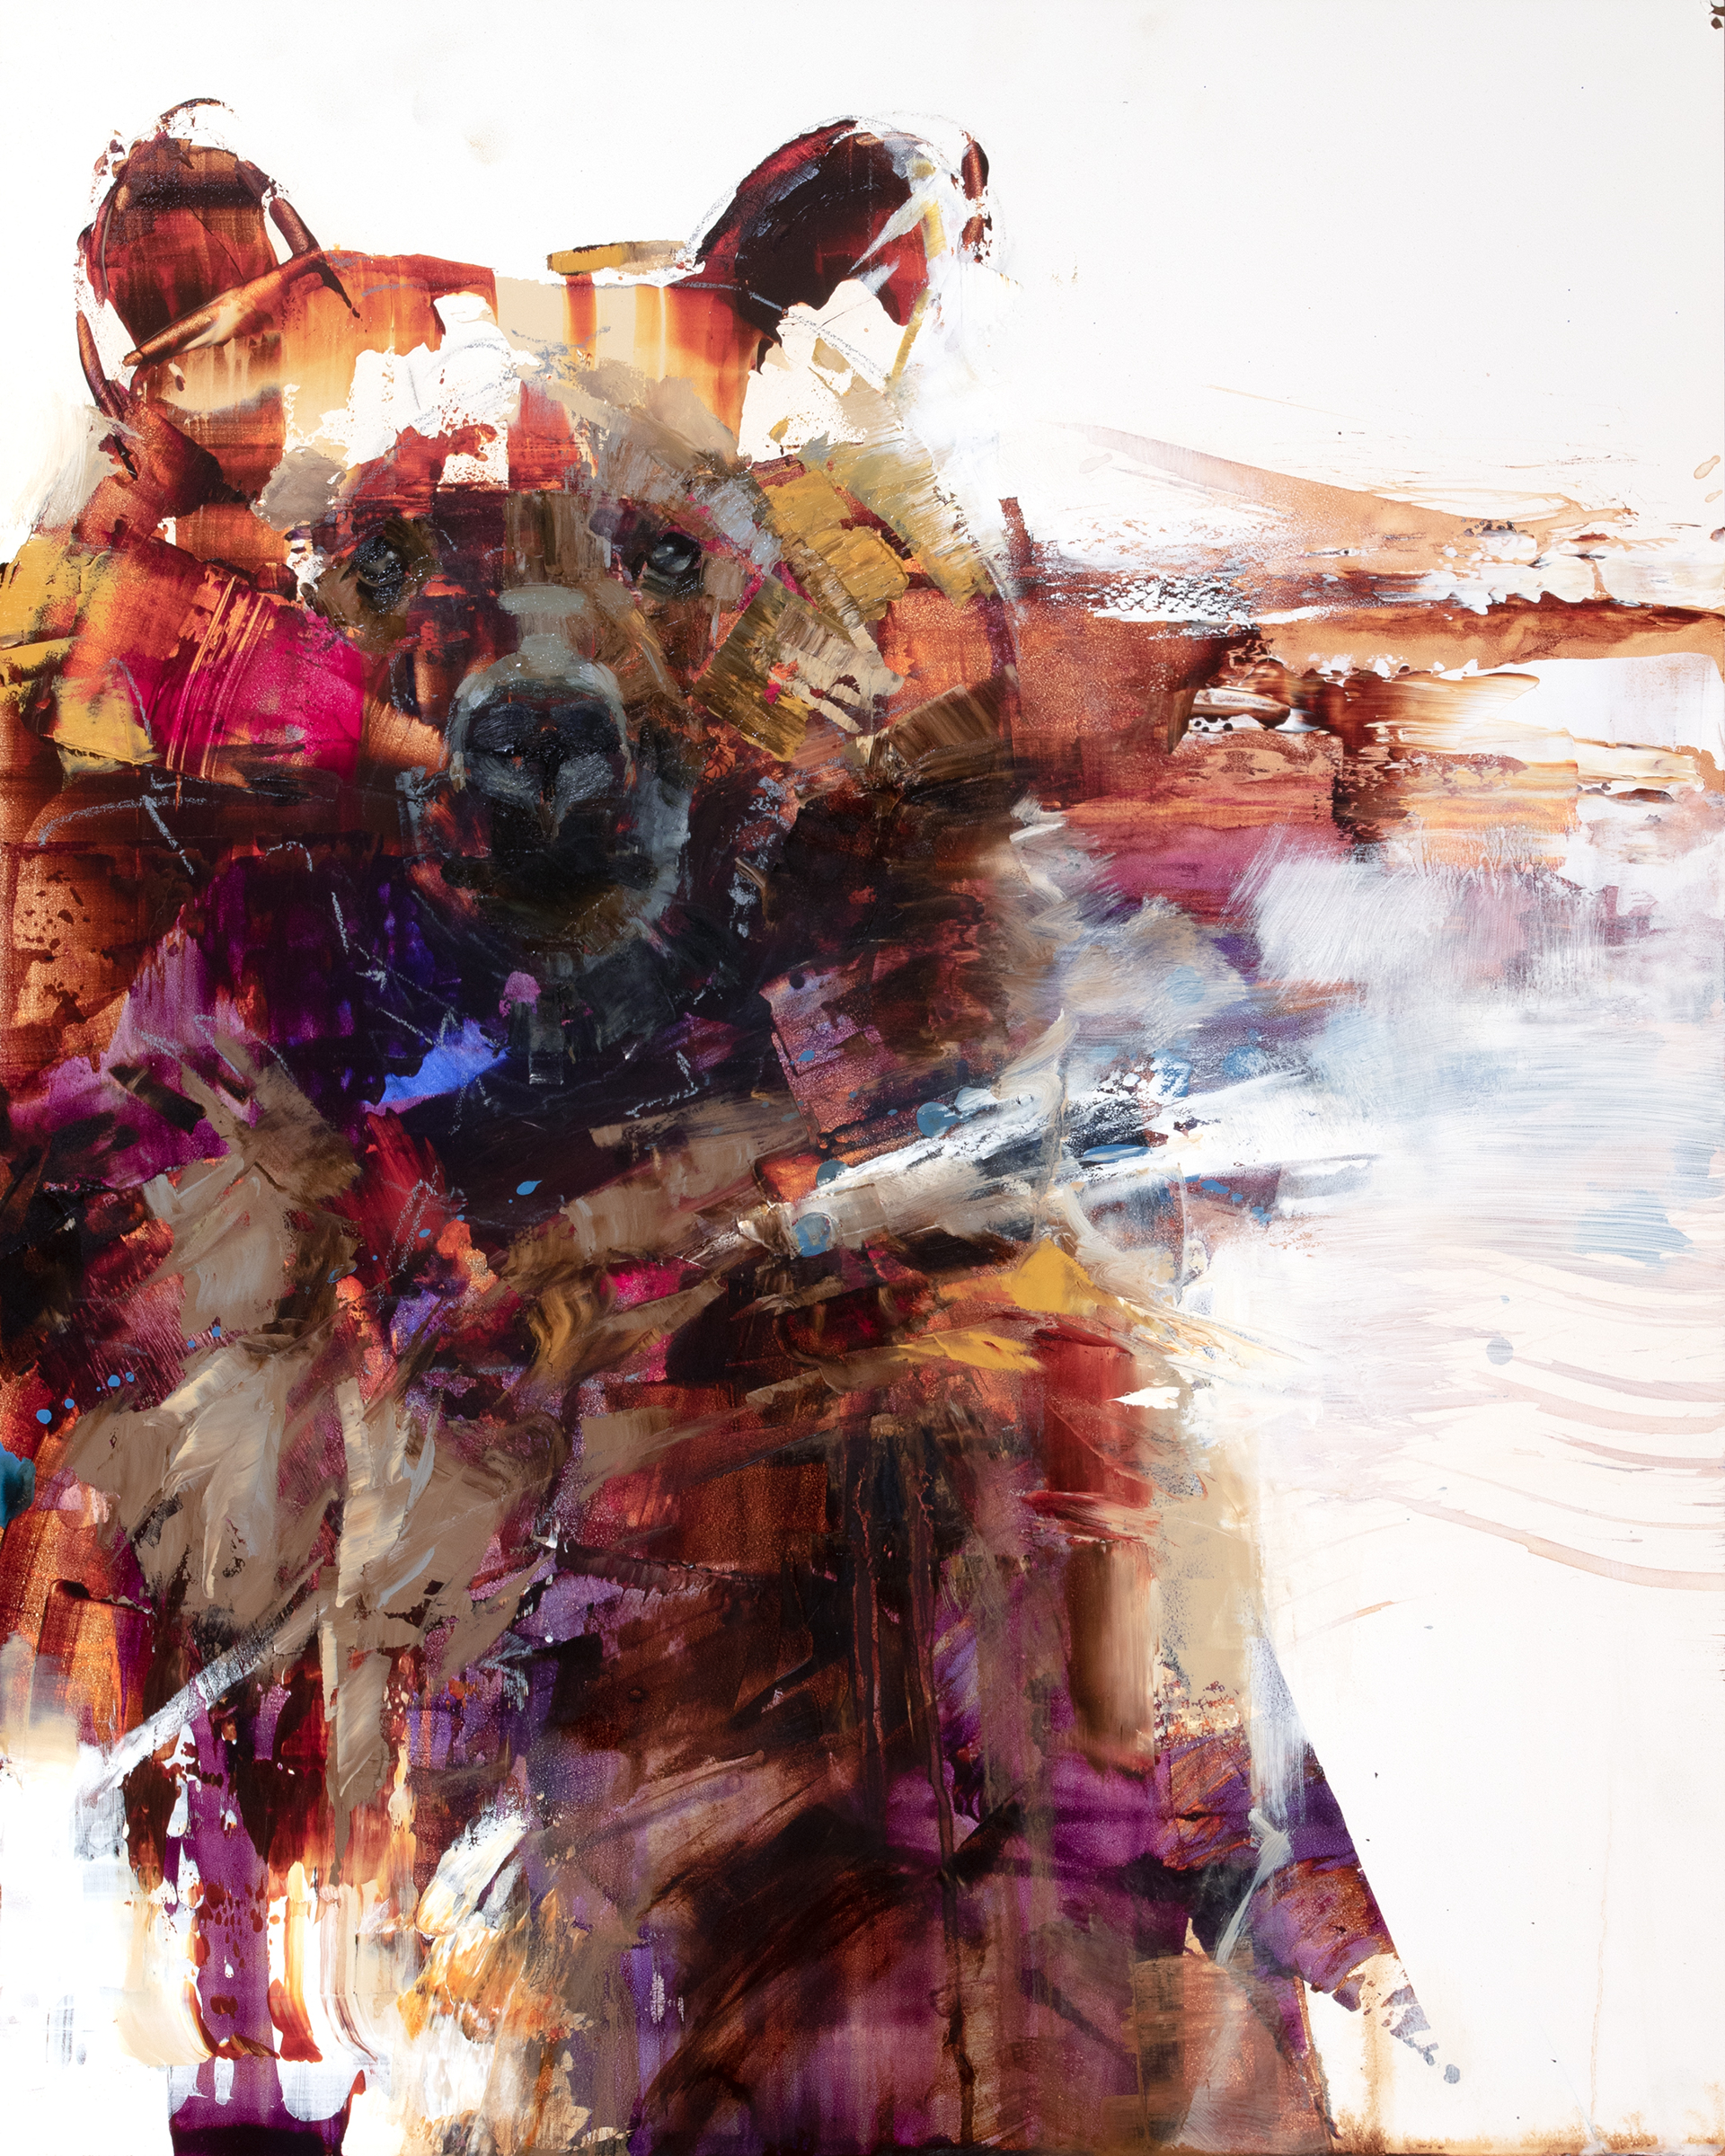 A Contemporary Fine Art Painting Using Mixed Media By Julie T Chapman Features An Abstract Grizzly Bear, Available At Gallery Wild